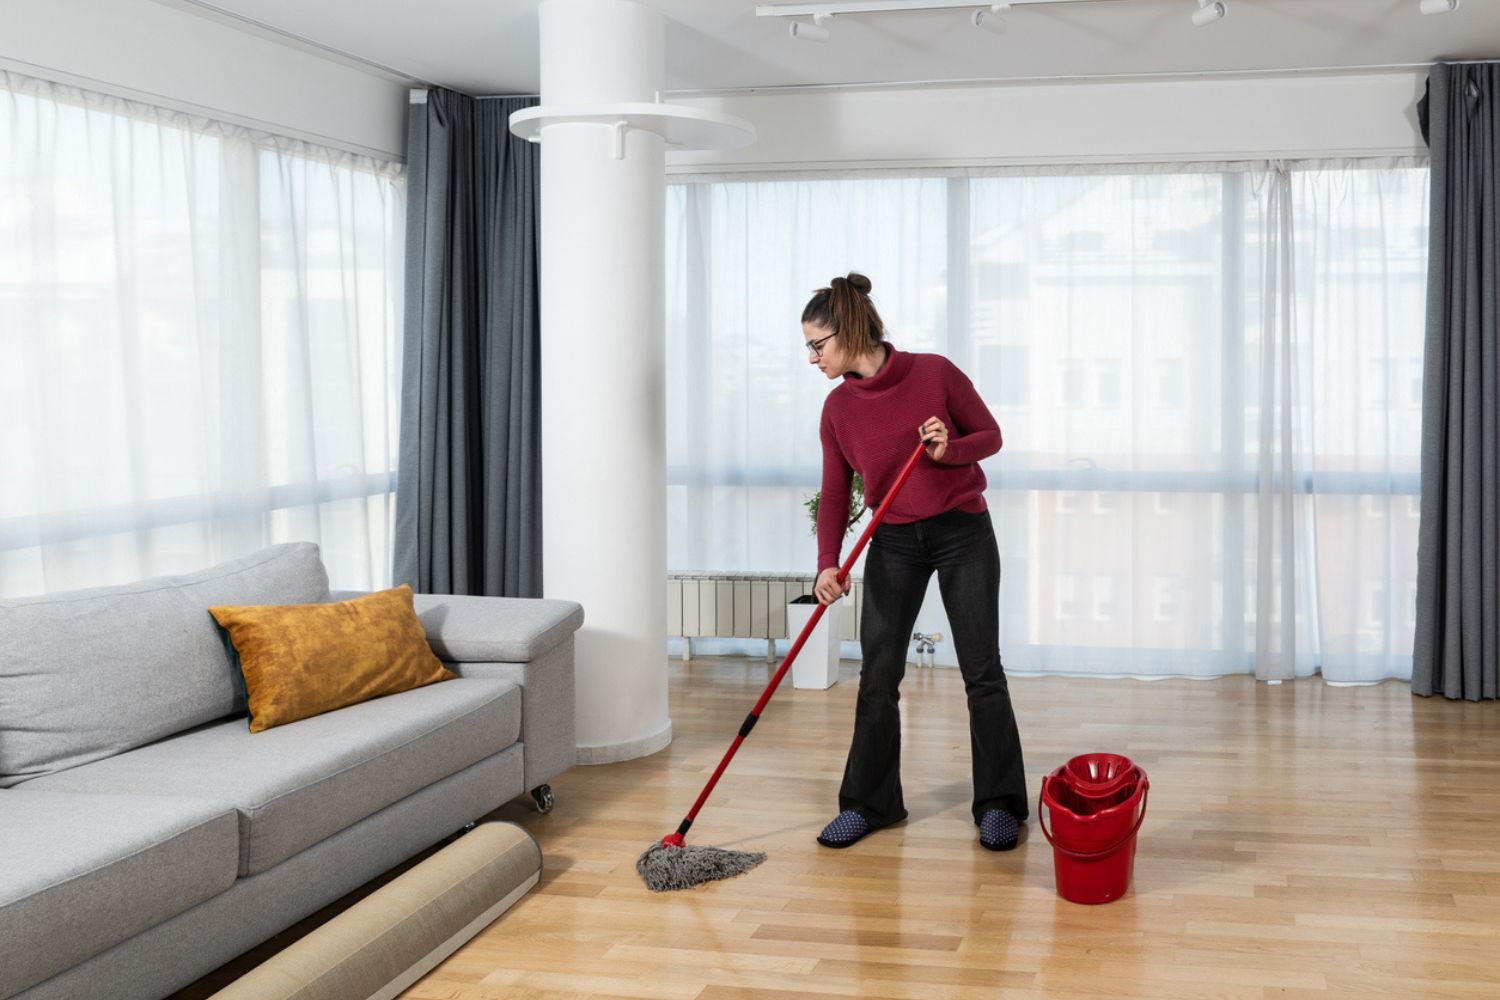 How Much Does Move-Out Cleaning Cost